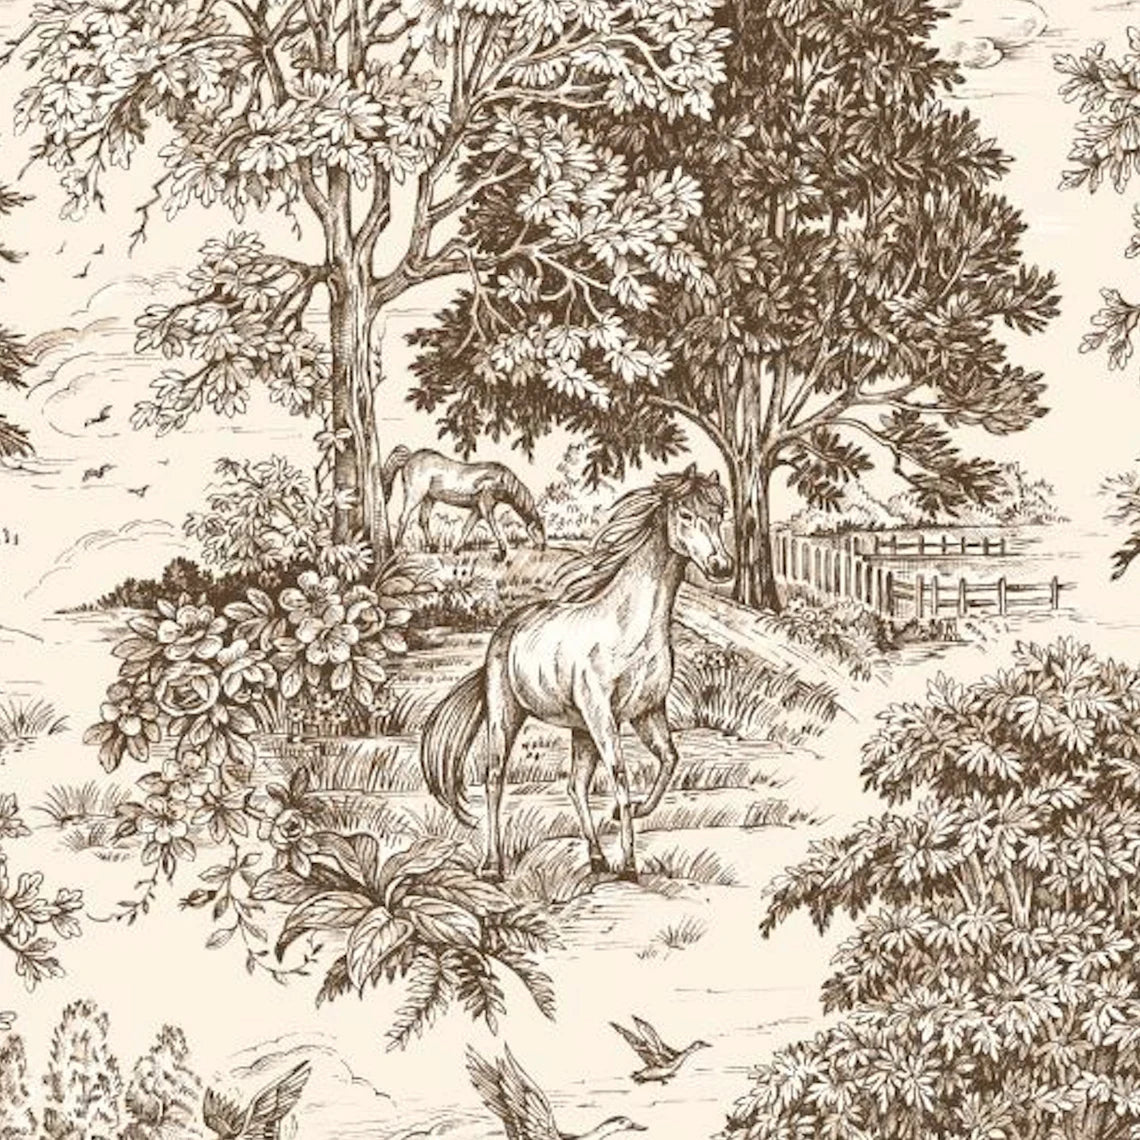 tailored tier cafe curtain panels pair in Yellowstone Driftwood Brown Country Toile- Horses, Deer, Dogs- Large Scale